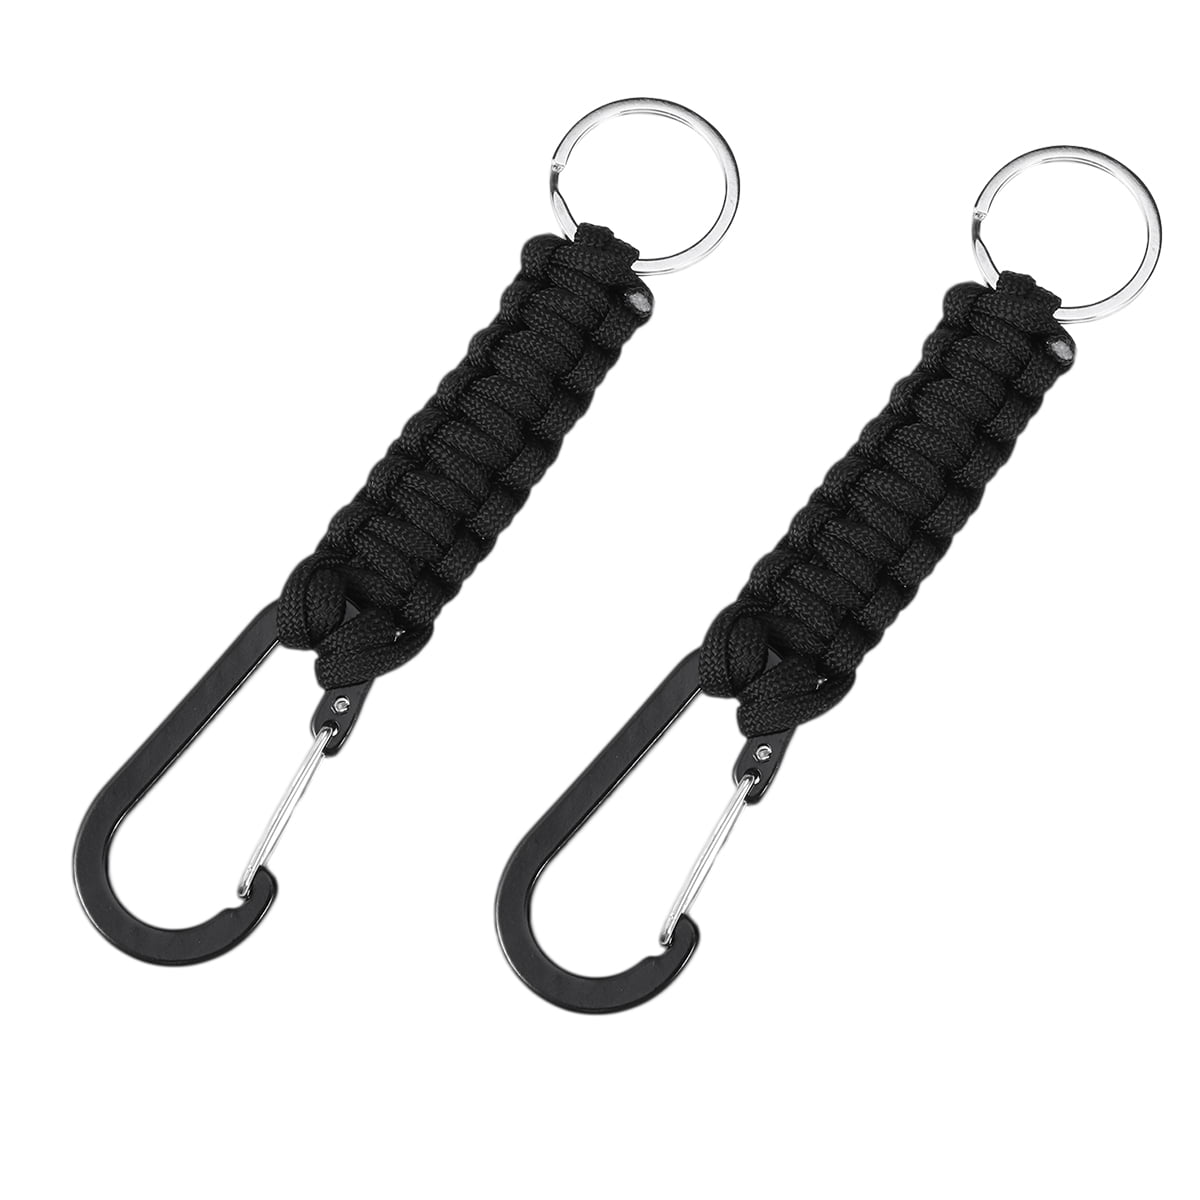 5Pack Keychain Ring Camping Carabiner Military Paracord Cord Rope Survival Kit 